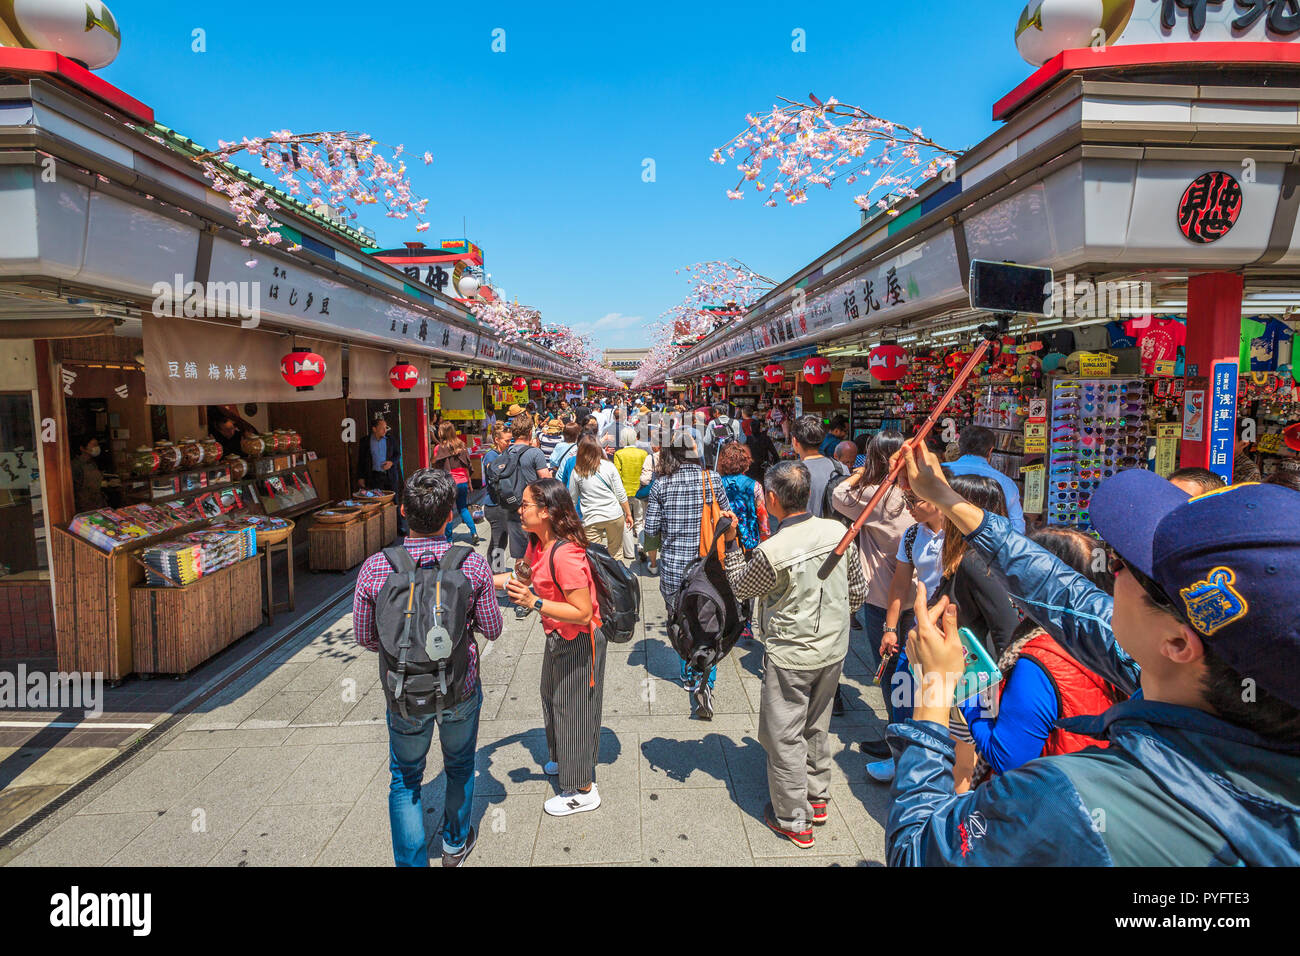 Tokyo, Japan - April 19, 2017: crowd of people in spring sakura on Nakamise Dori, street with food and souvenirs shops, connetting the Kaminarimon Gate at the entrance of Senso-ji Buddhist Temple. Stock Photo